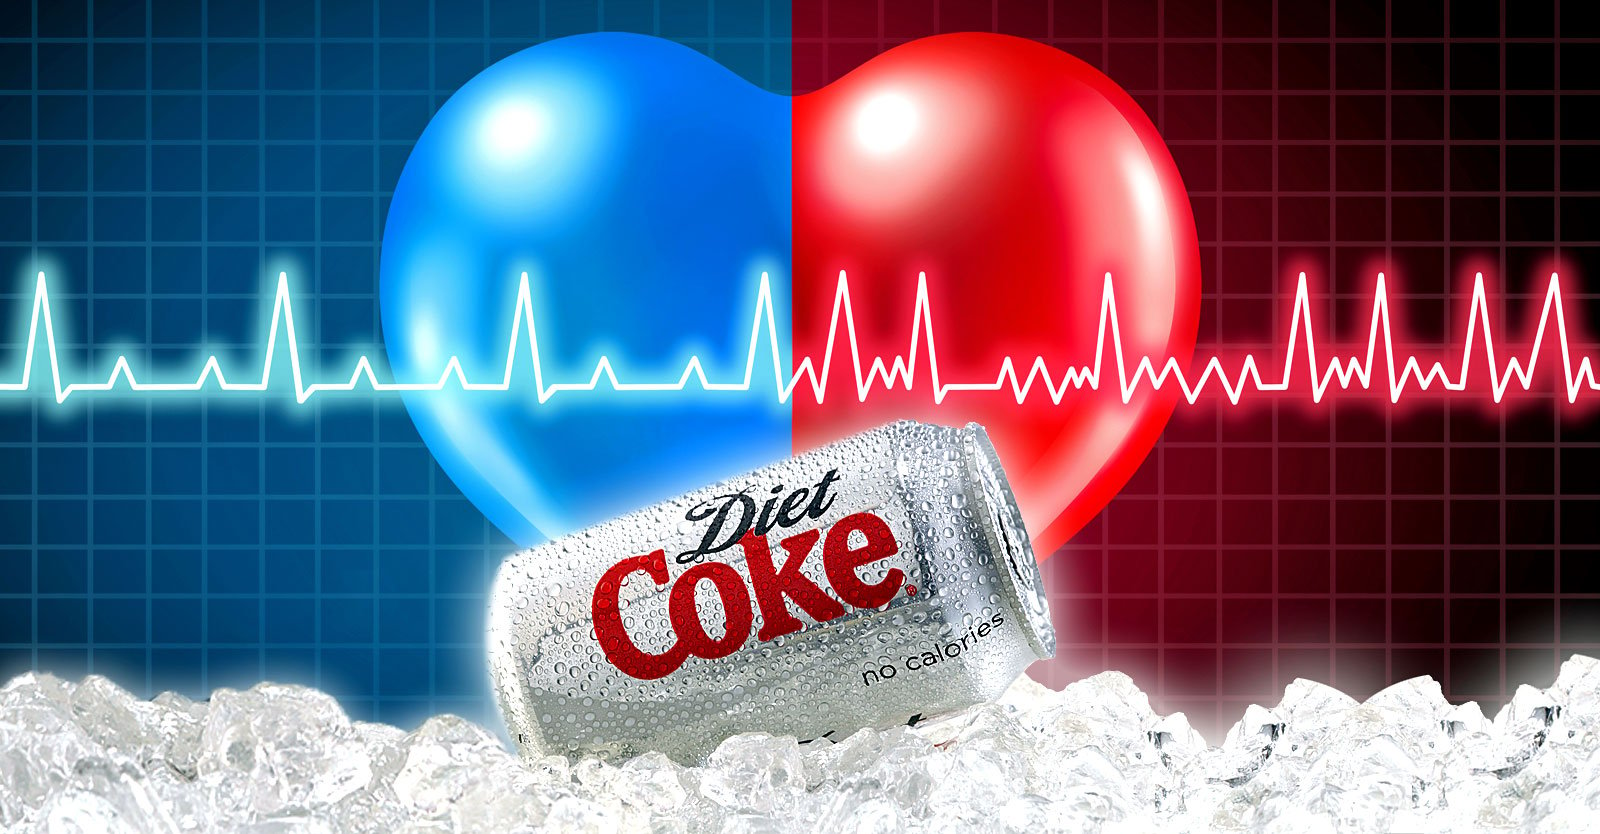 Artificially Sweetened Drinks Linked To Serious Heart Condition